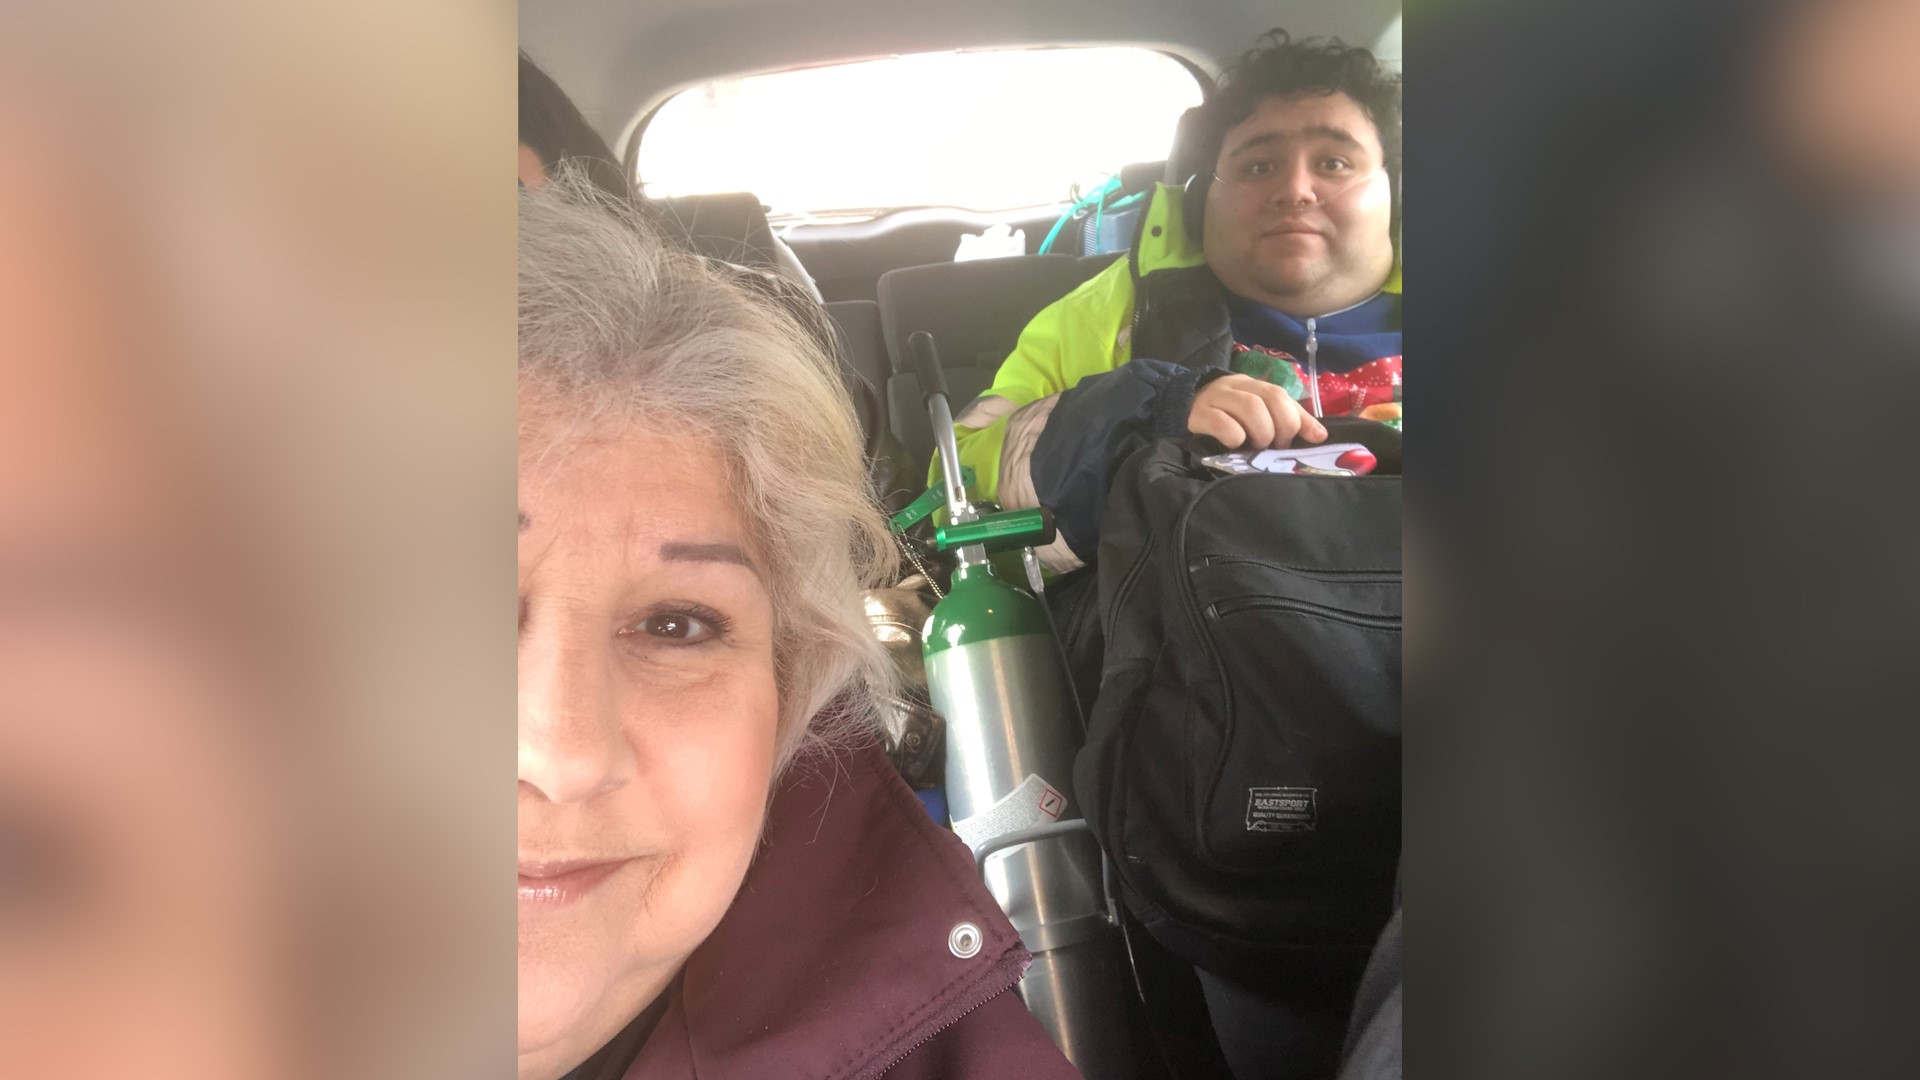 Veronica Degollado said she and her son were low on oxygen when they lost power, and first responders answered their call for help.